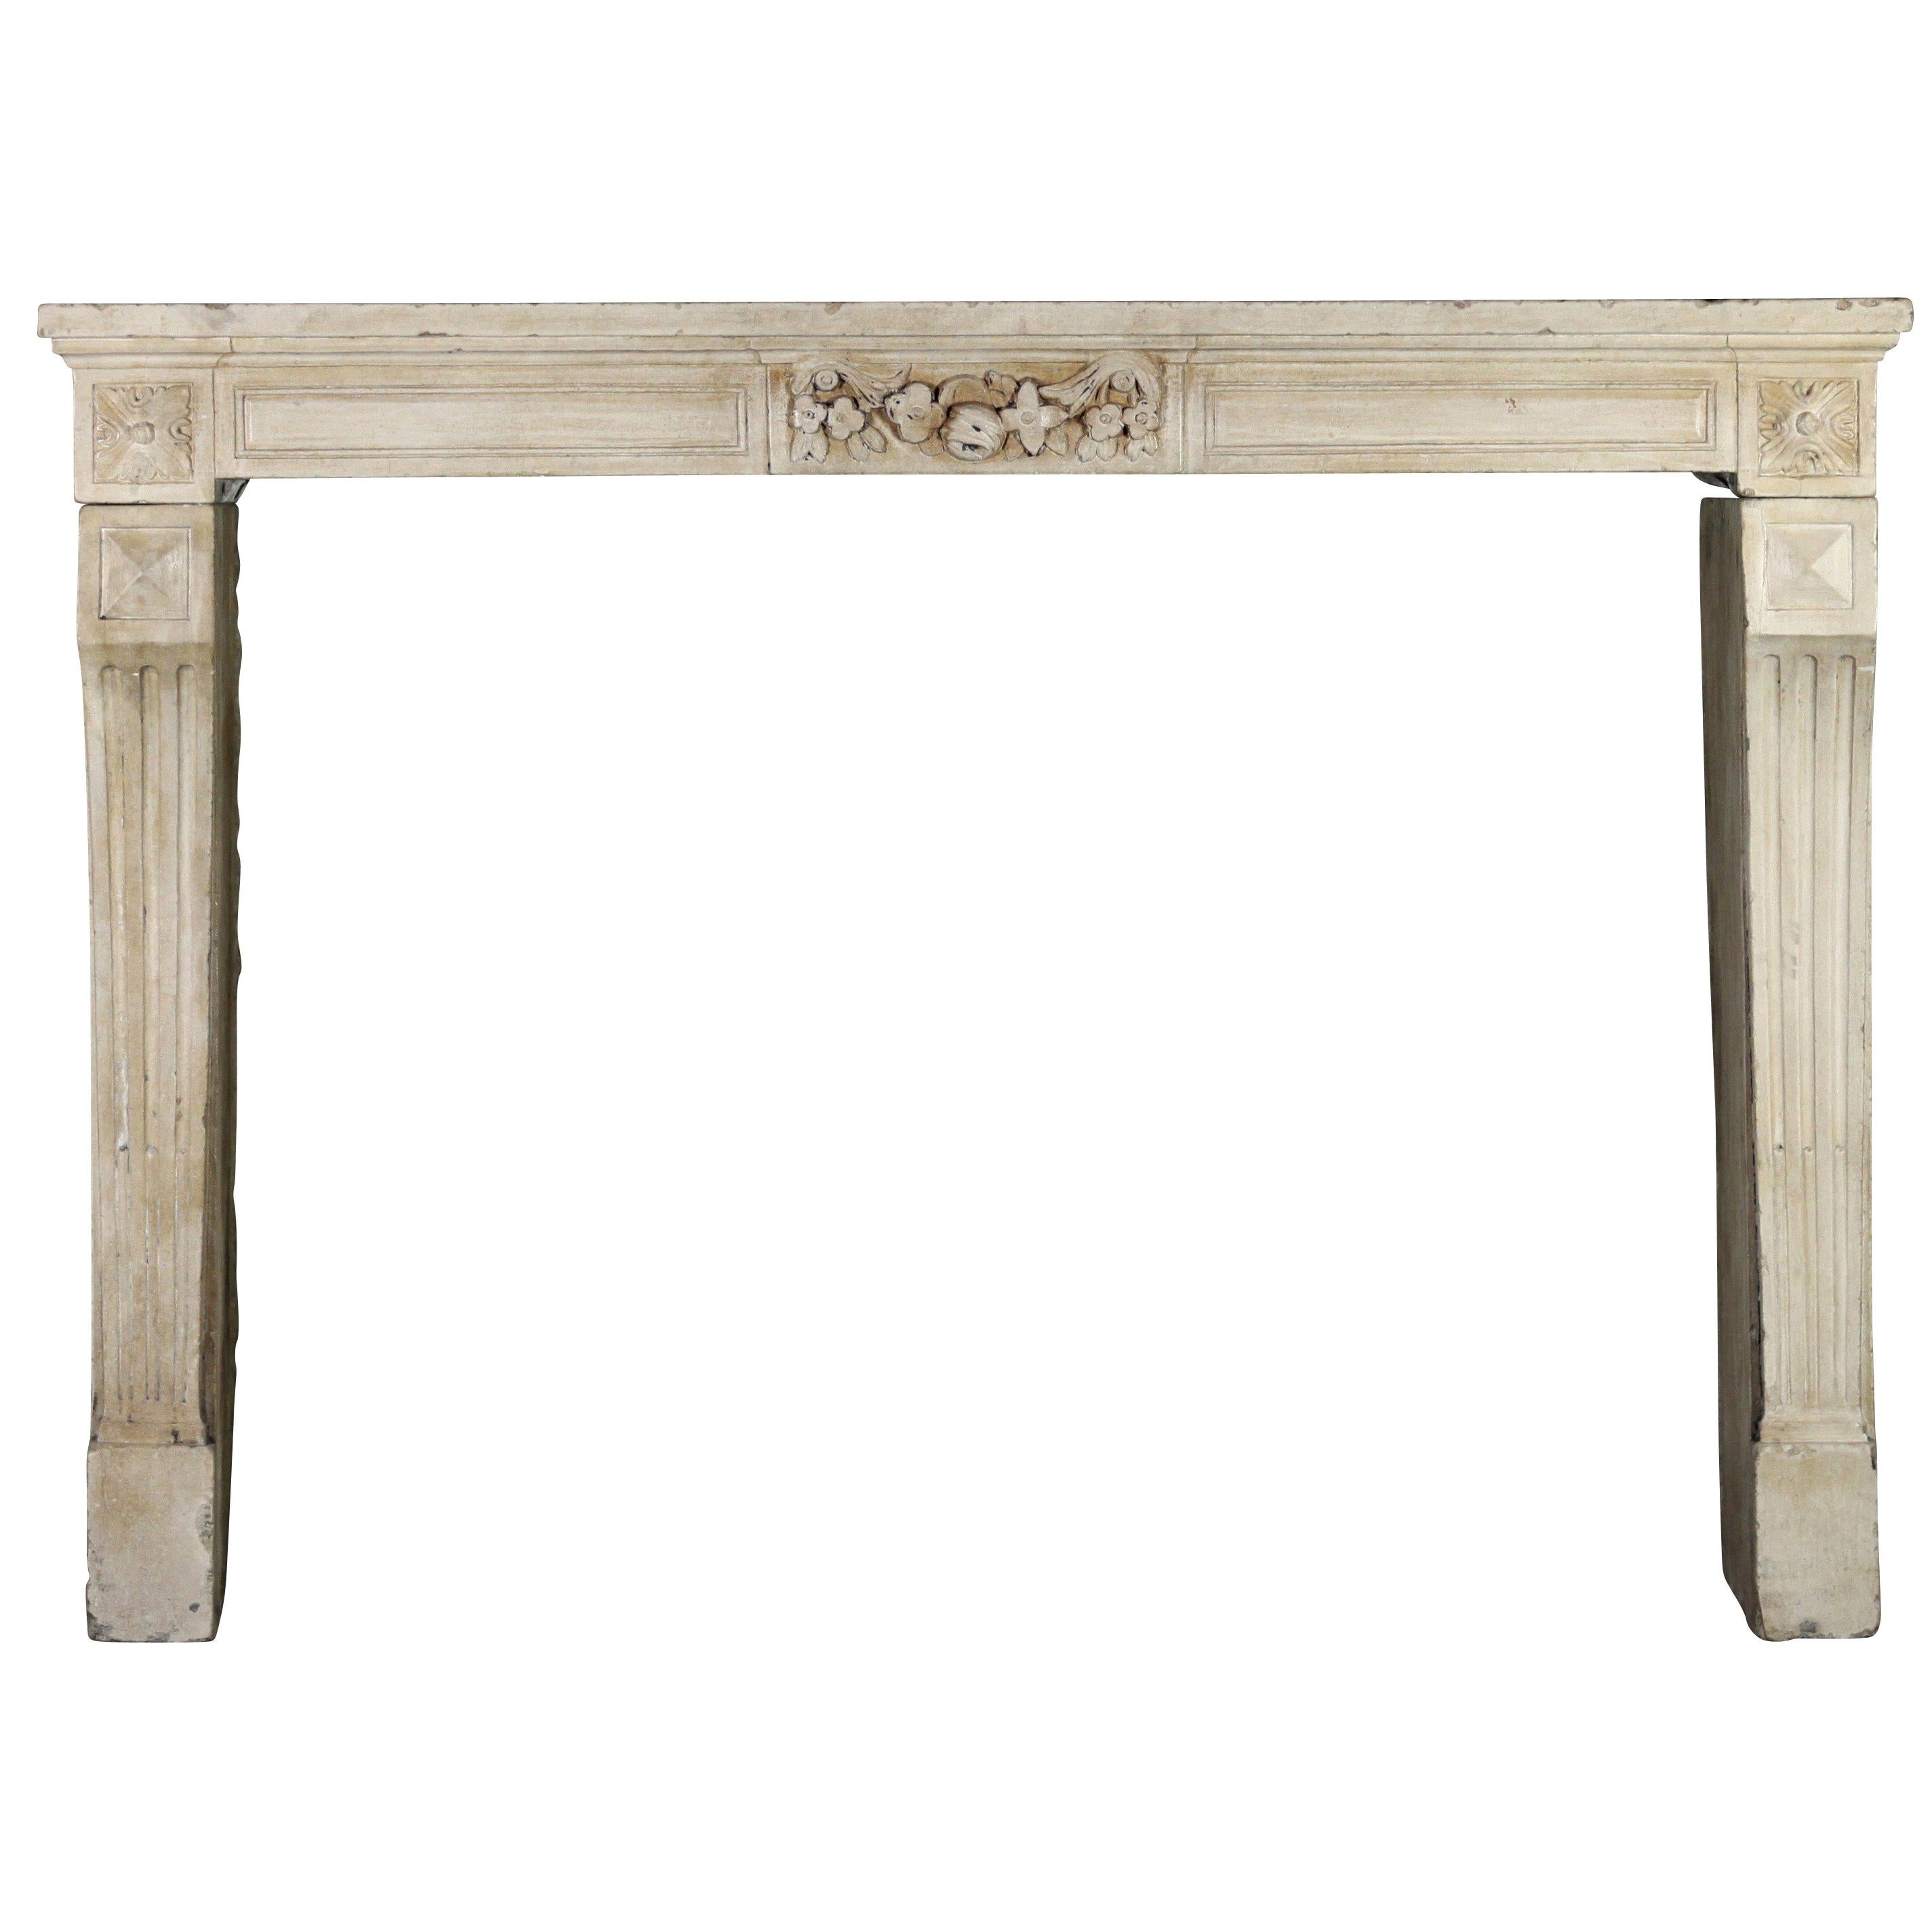 18th Century French Limestone Country Antique Fireplace Surround